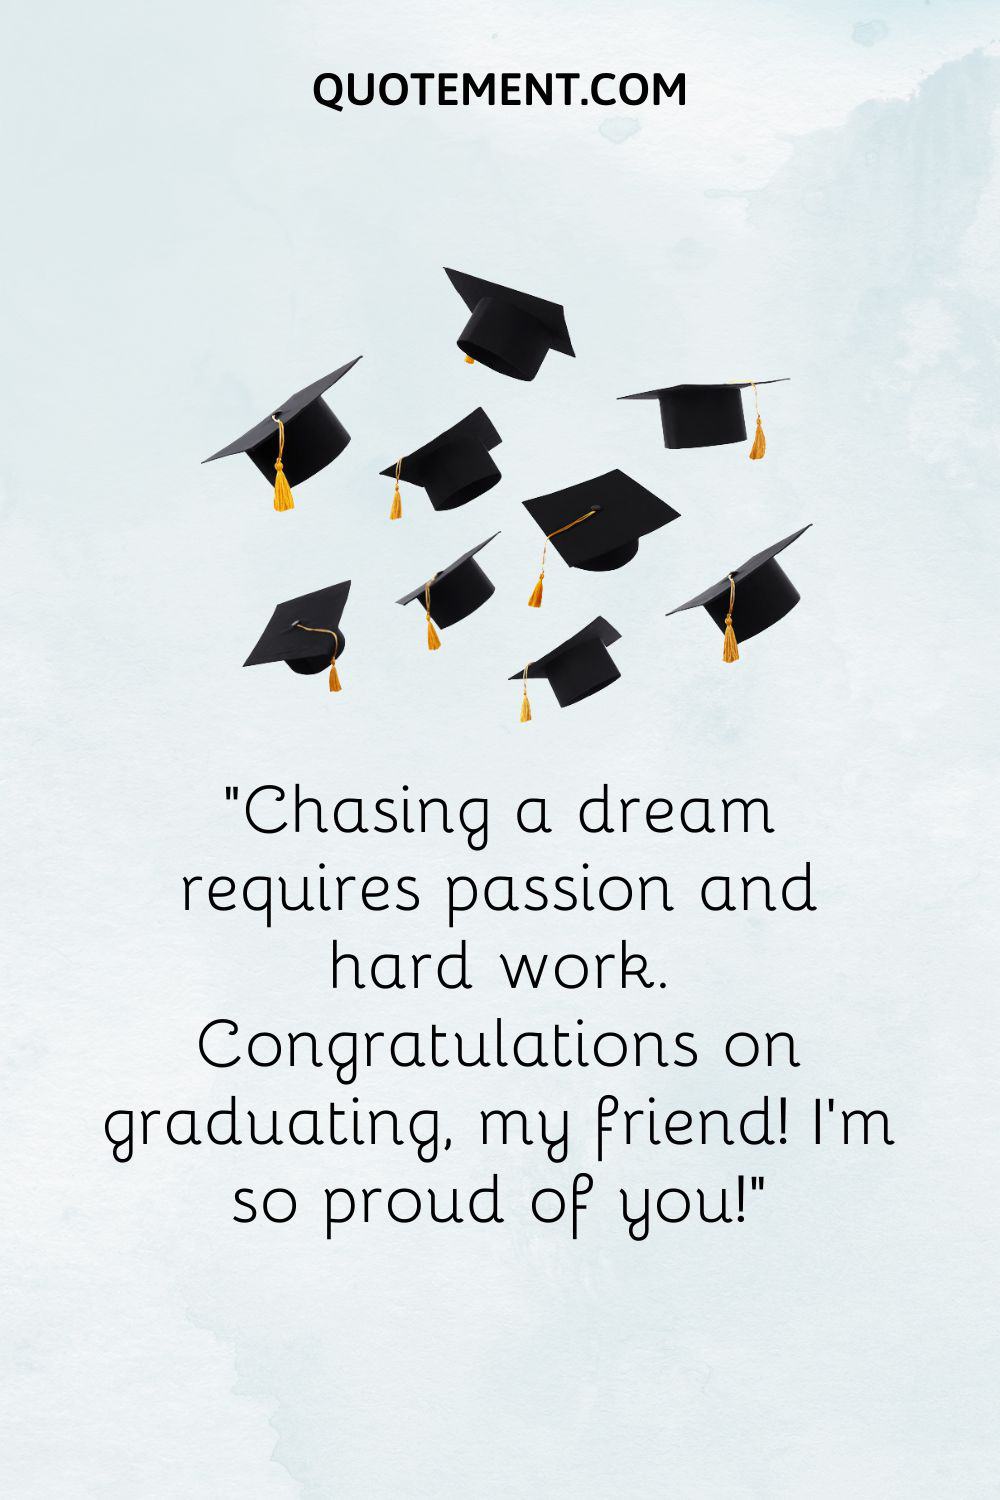 Chasing a dream requires passion and hard work. Congratulations on graduating, my friend! I’m so proud of you!